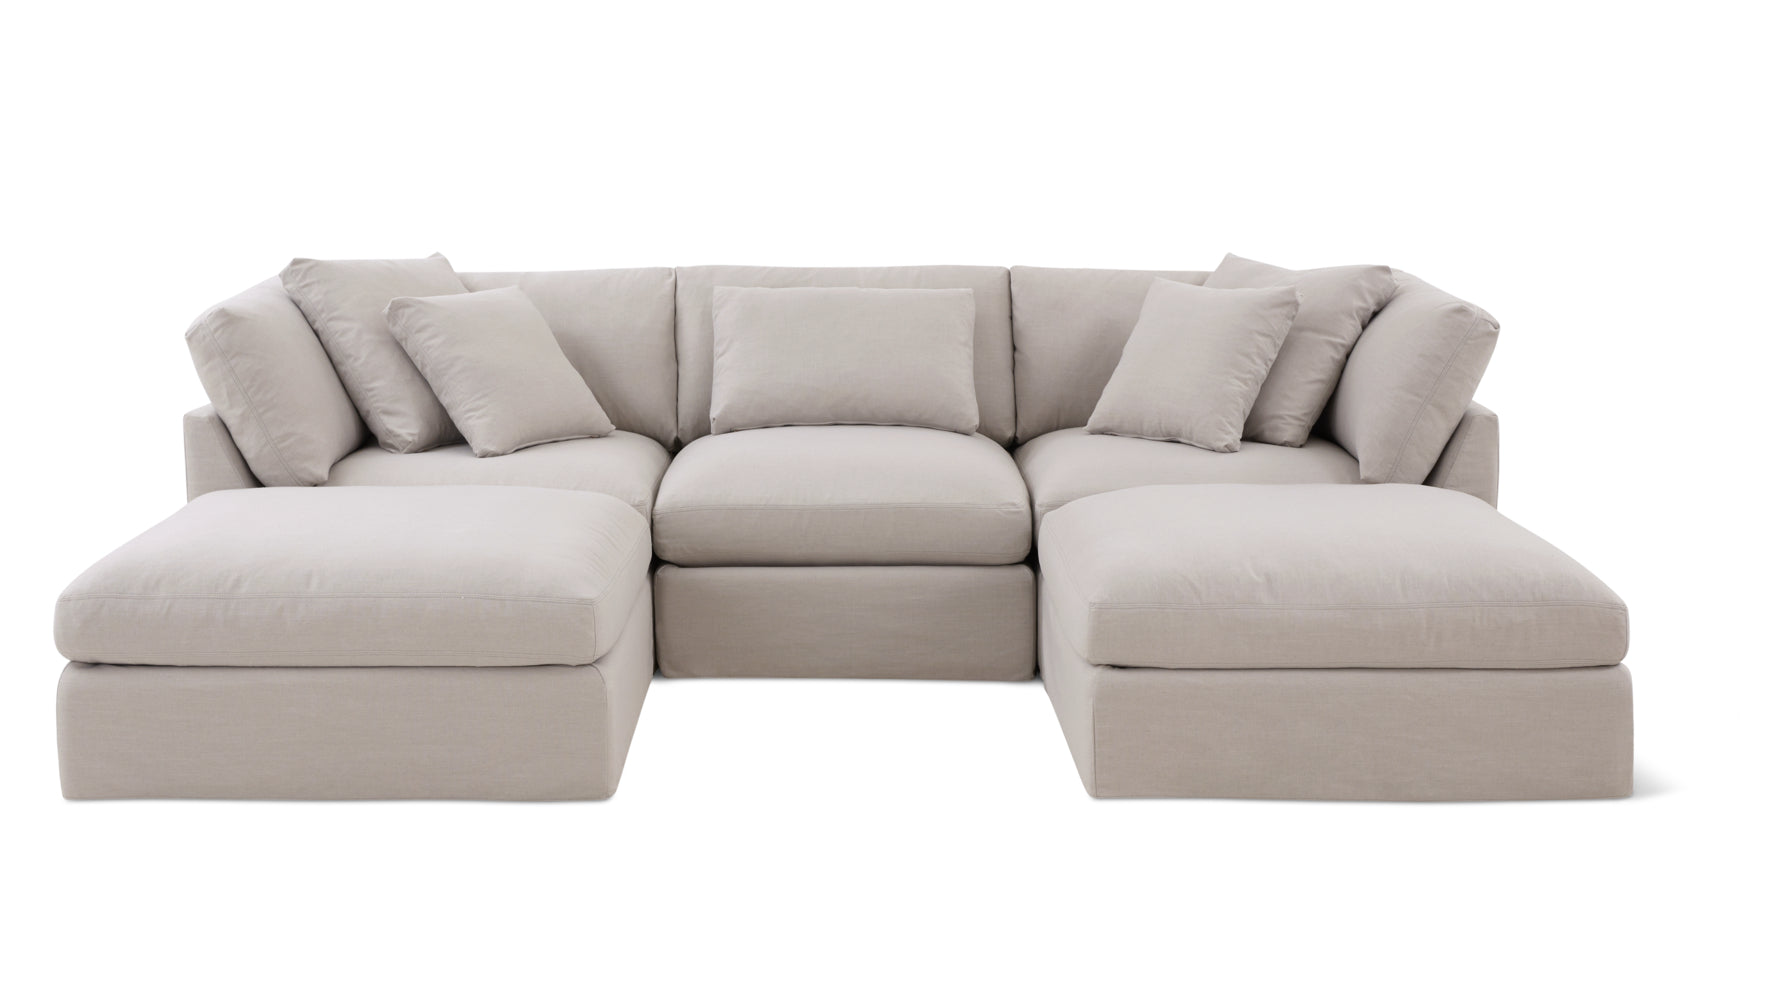 Get Together™ 5-Piece Modular U-Shaped Sectional, Large, Clay - Image 1